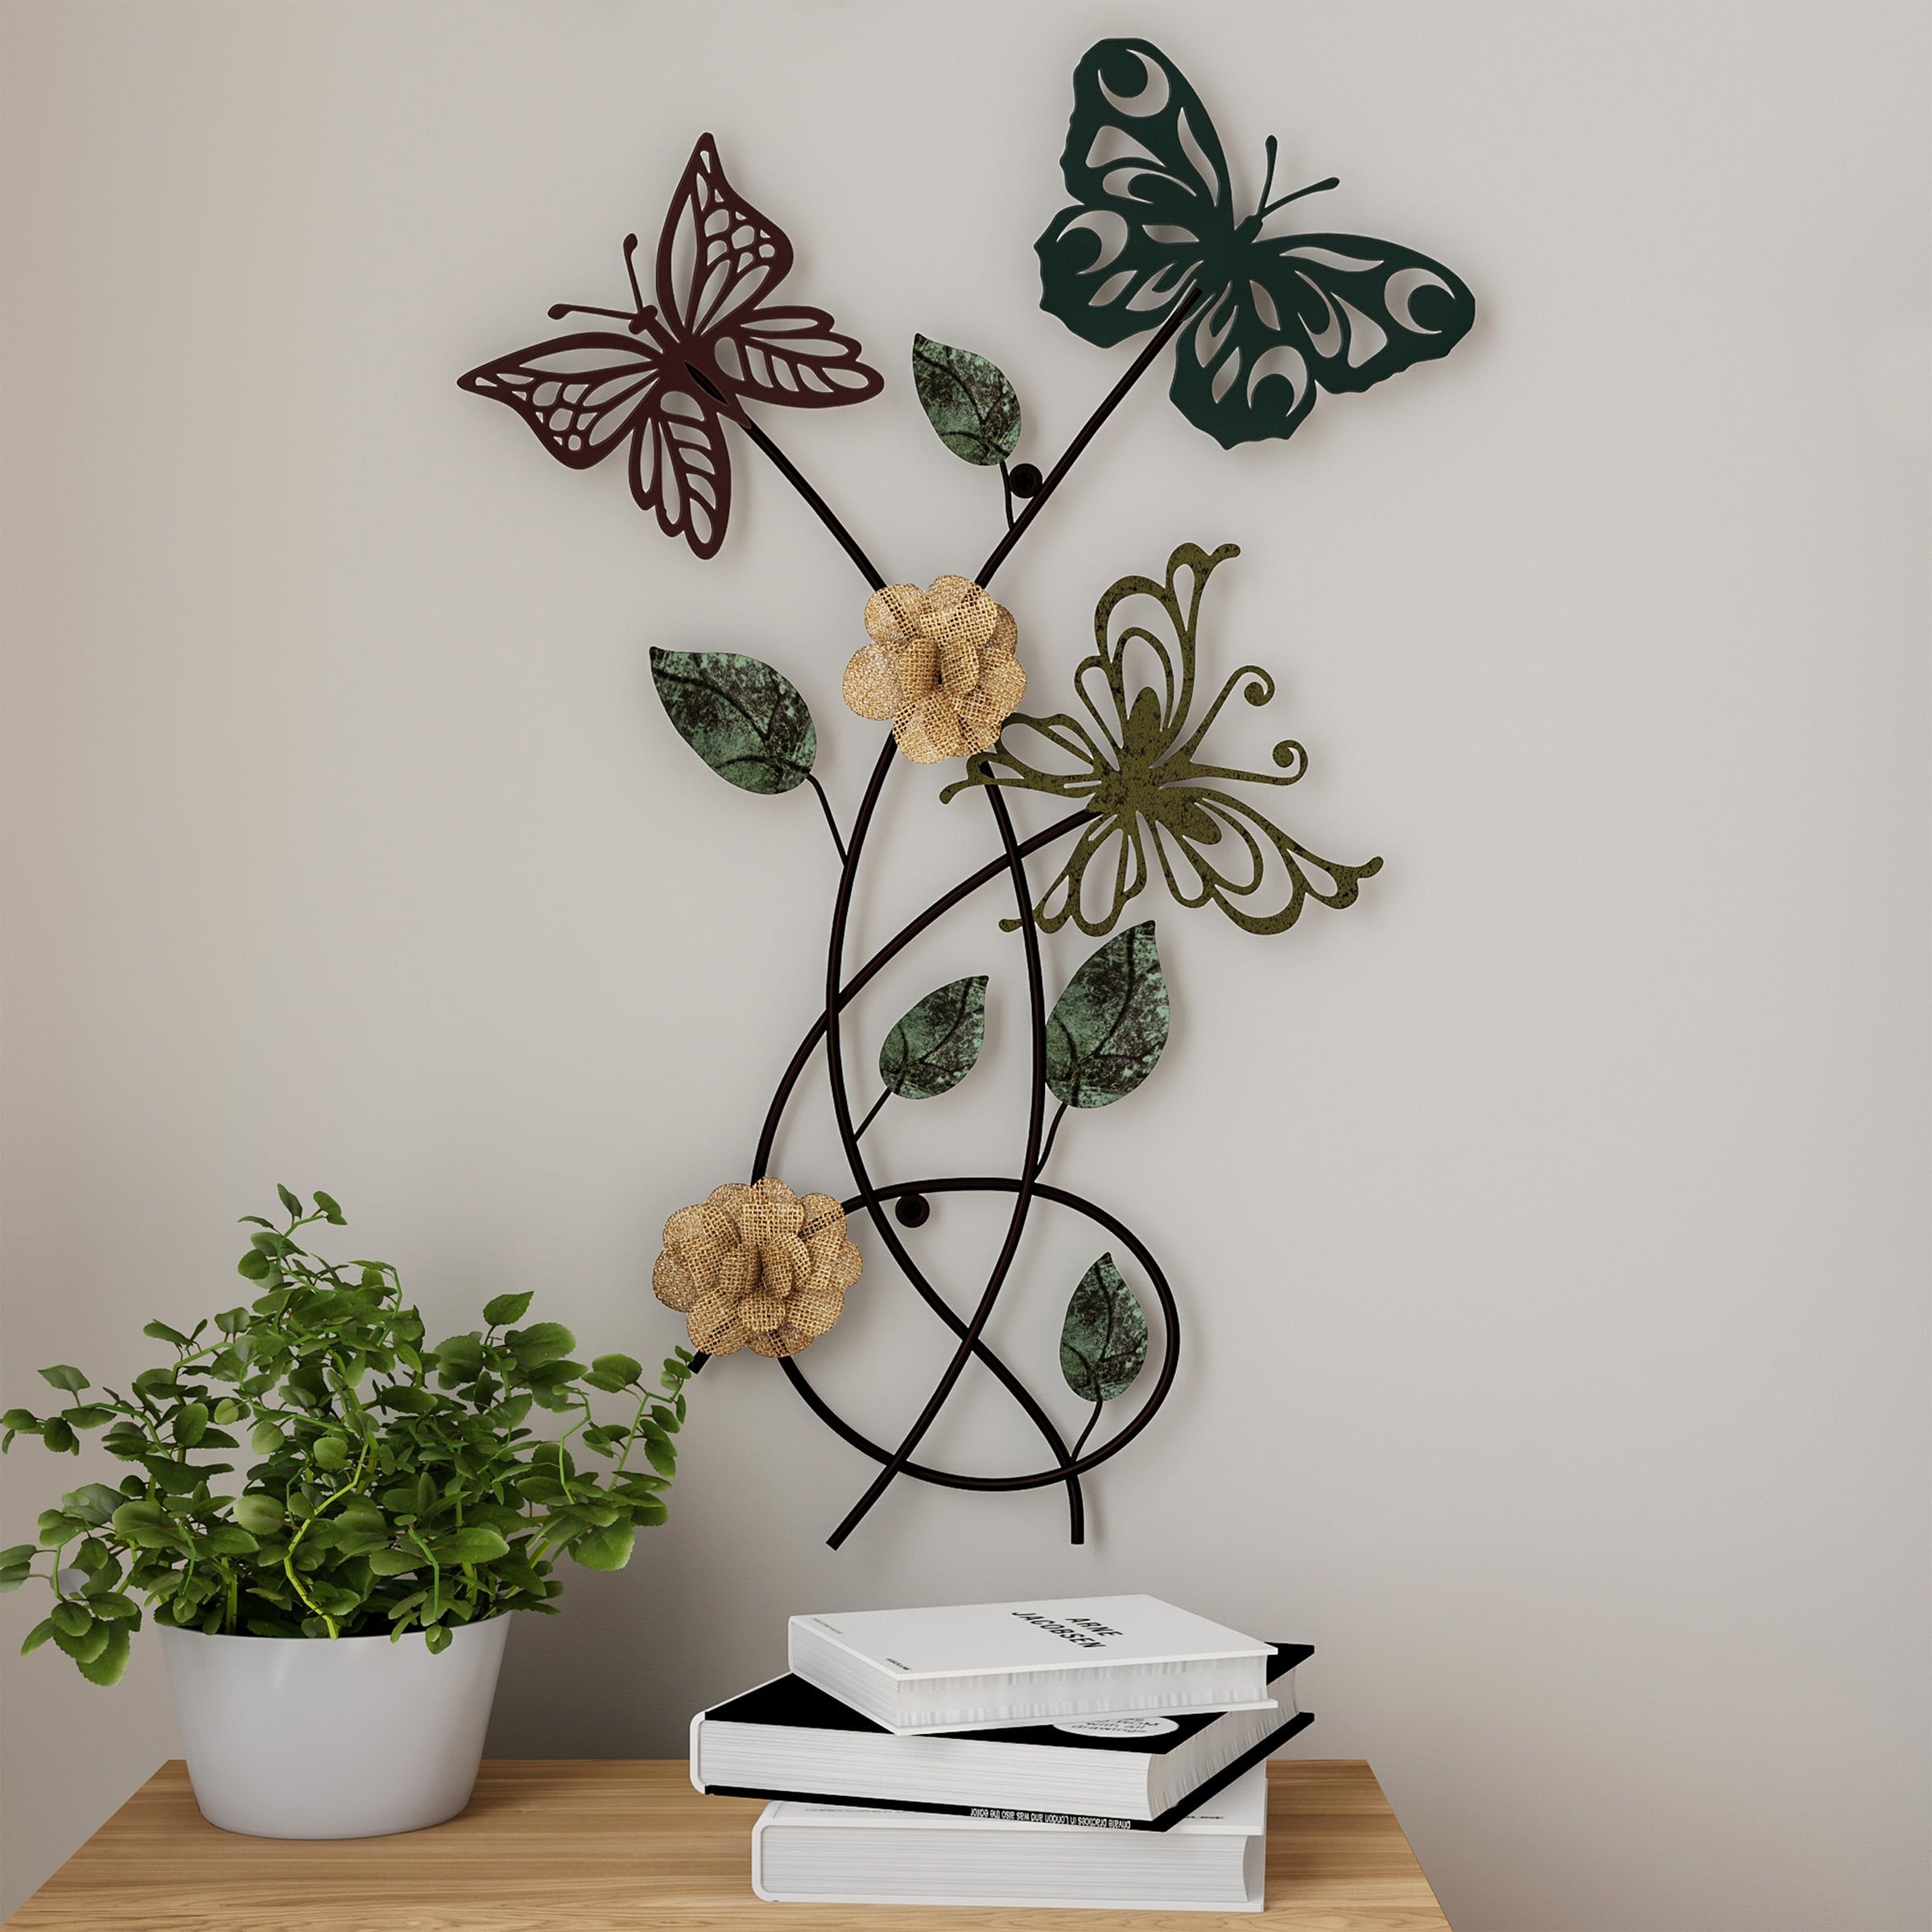 Garden Butterfly Metal Wall Art  Hand Painted Decorative 3d Butterflies,  Flowers For Modern Farmhouse Rustic Home Or Office Decorlavish Home –  Walmart With Regard To Hand Drawn Wall Art (View 10 of 15)